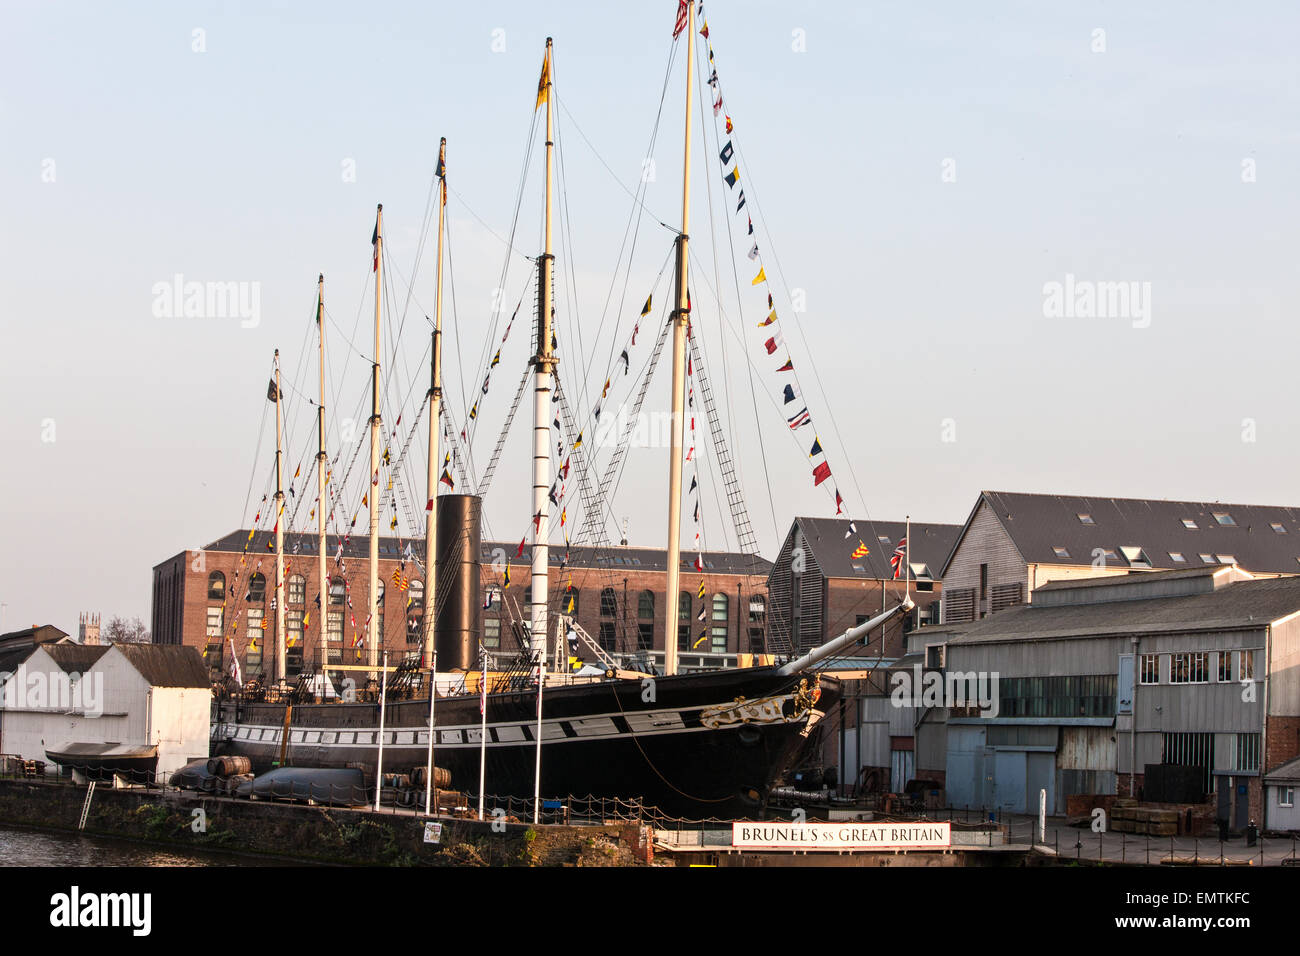 Bristol,Brunel's SS.Great Britain ship/boat at Great Western Dockyard.This  award-winning visitor attraction is number 1 of 97 Br Stock Photo - Alamy